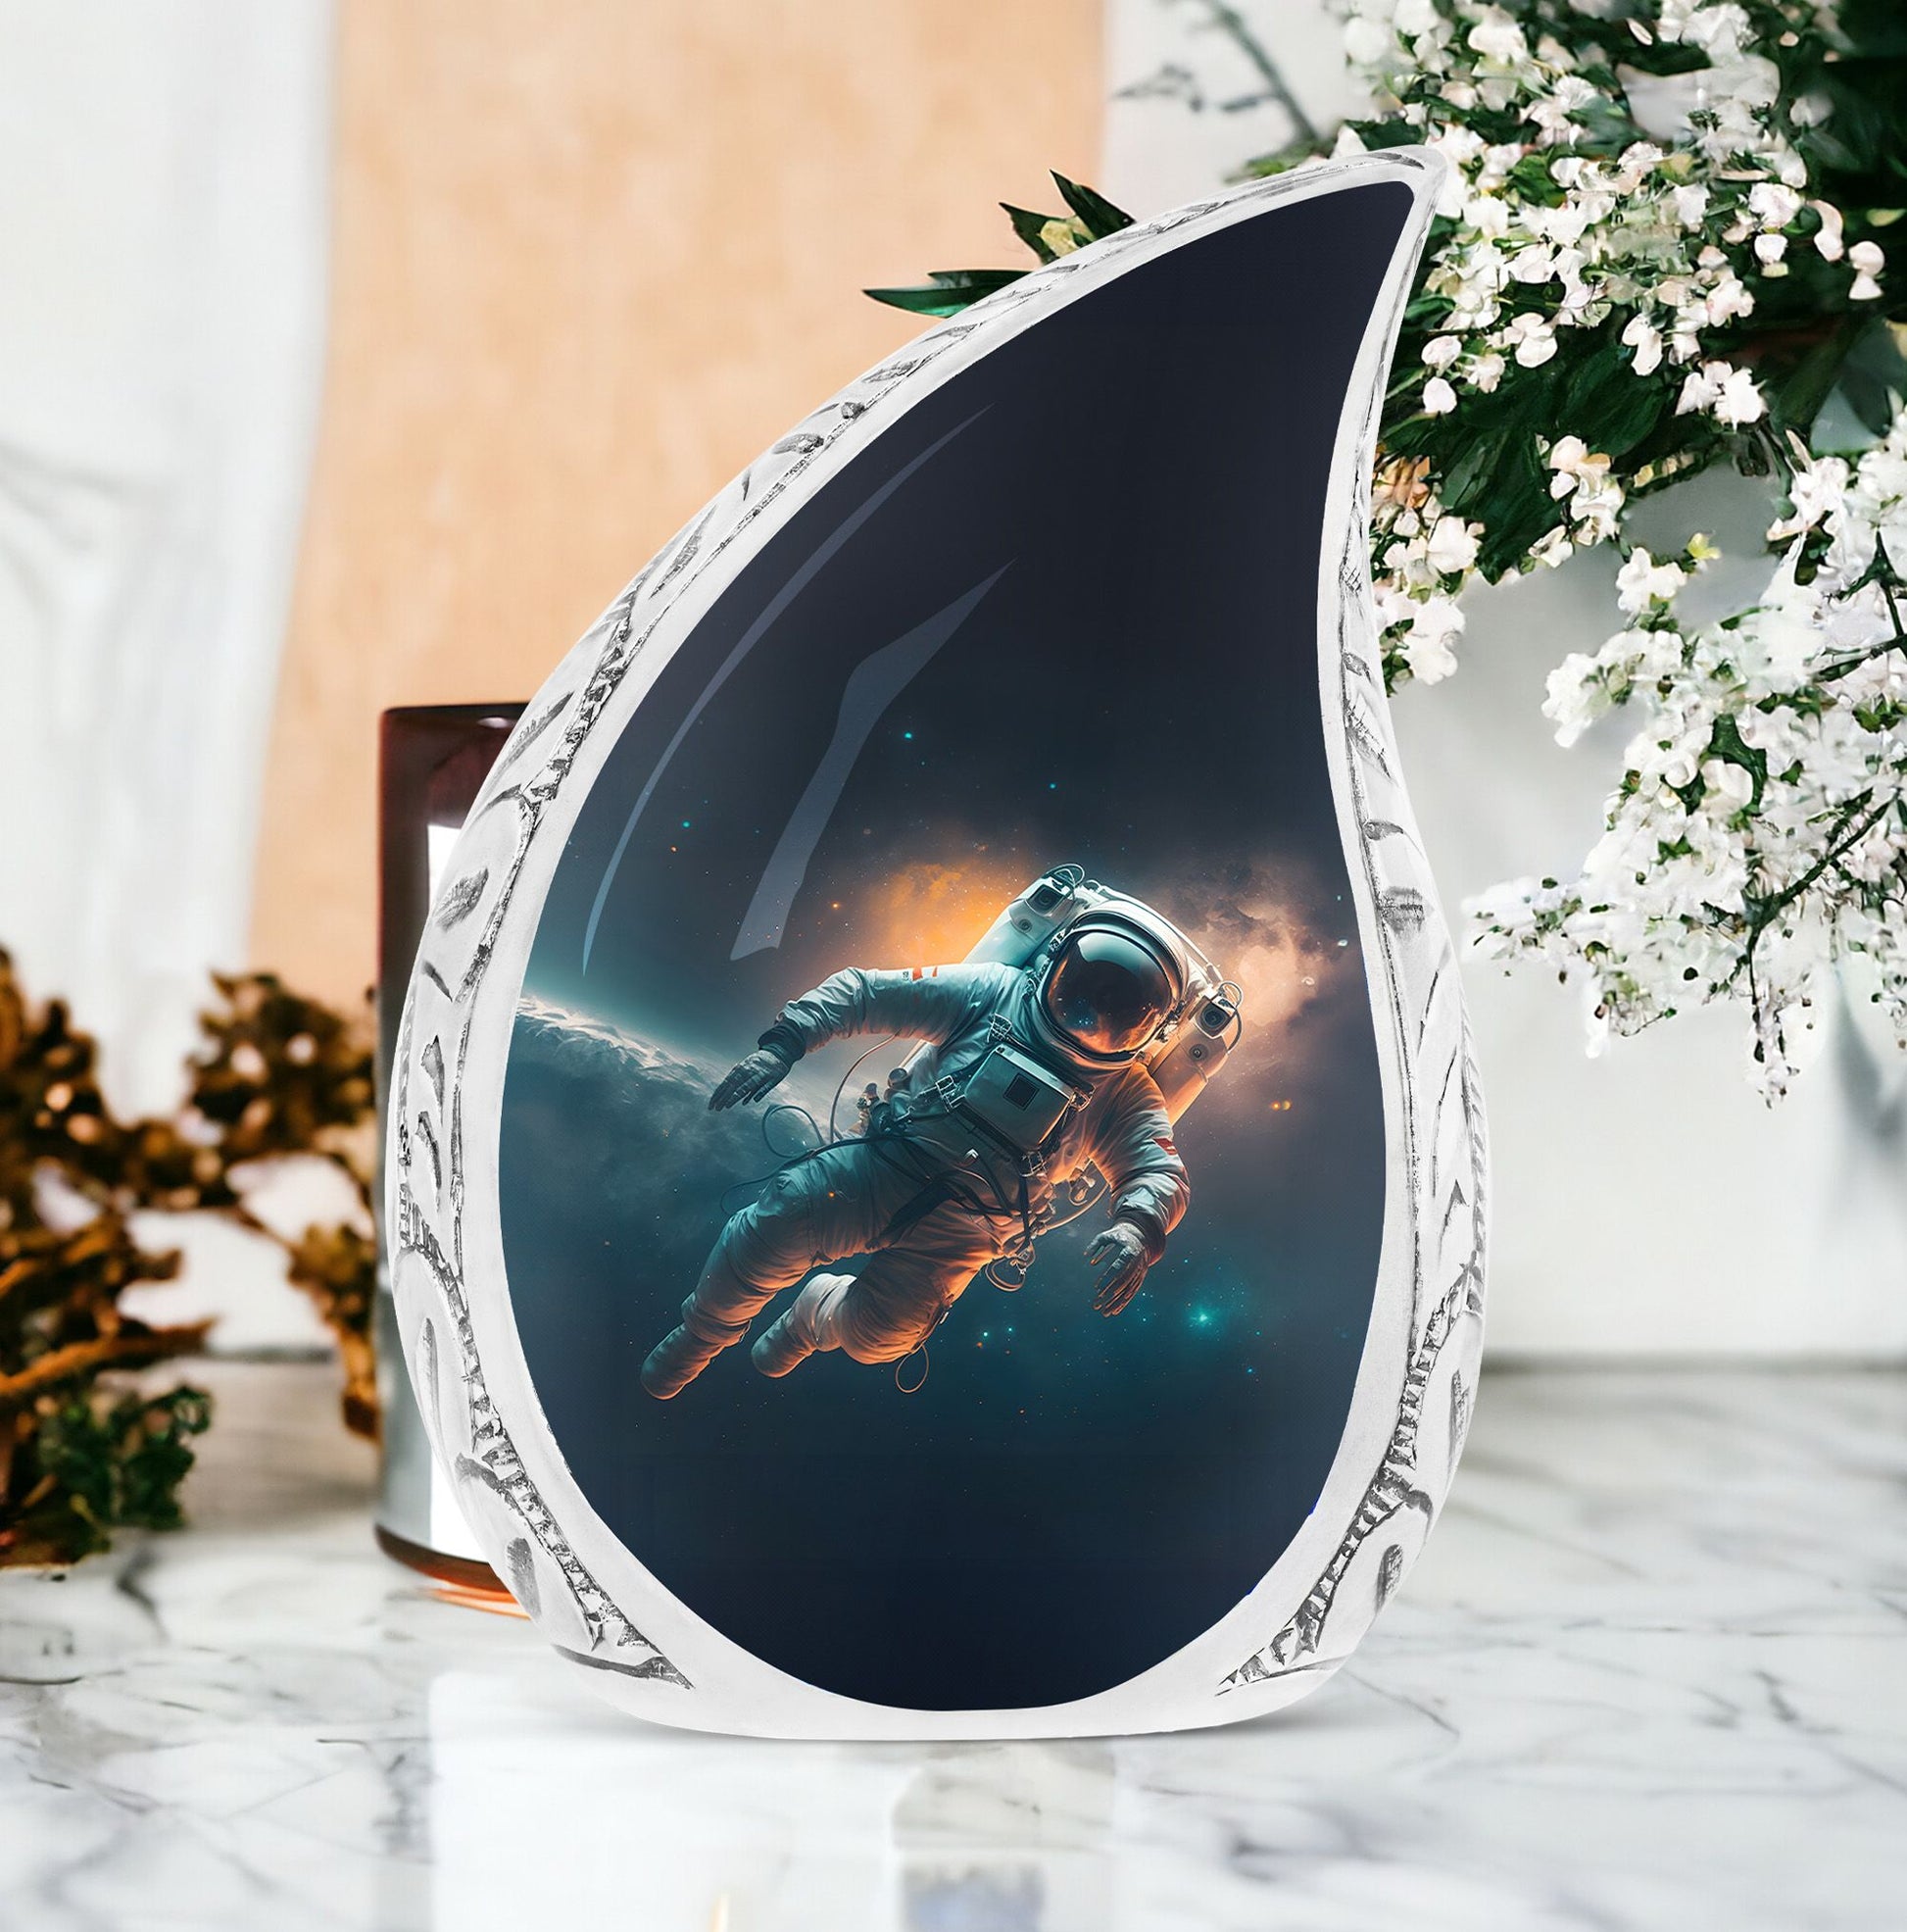 Unique large urn for human ashes, featuring astronaut in zero gravity design